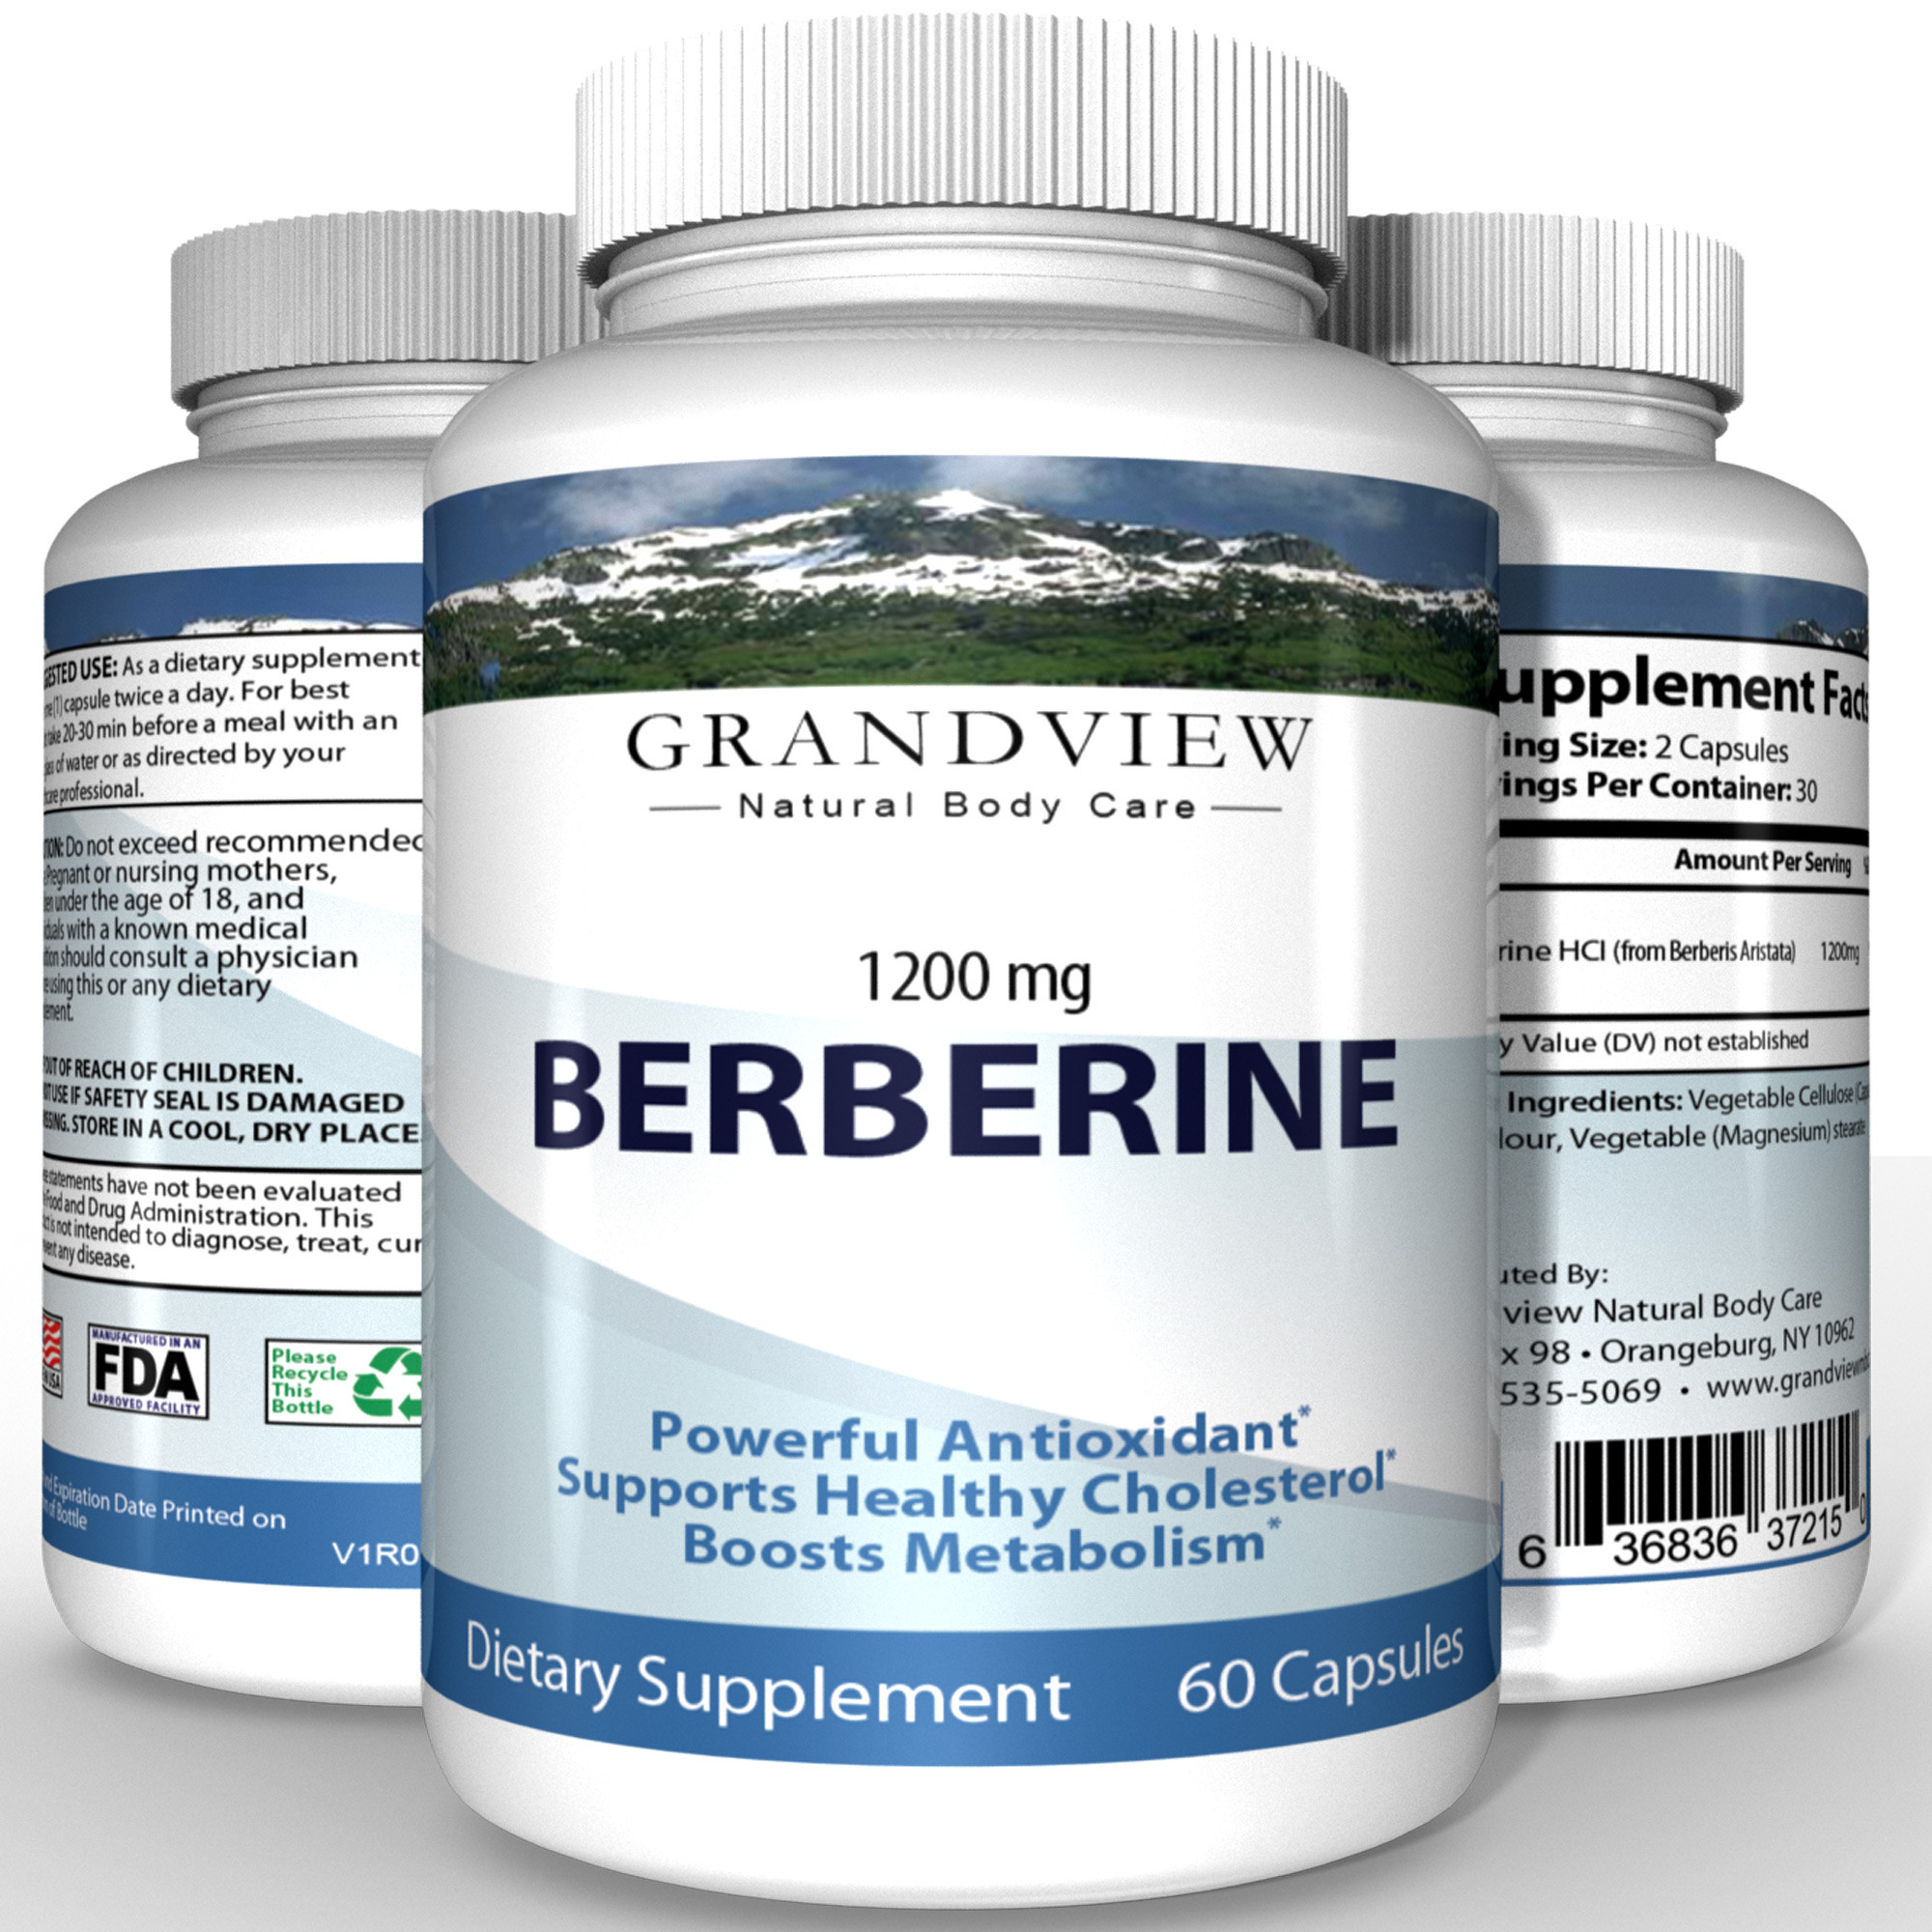 All Natural Weight Loss Supplements
 Berberine All natural herbal supplement Supports weight